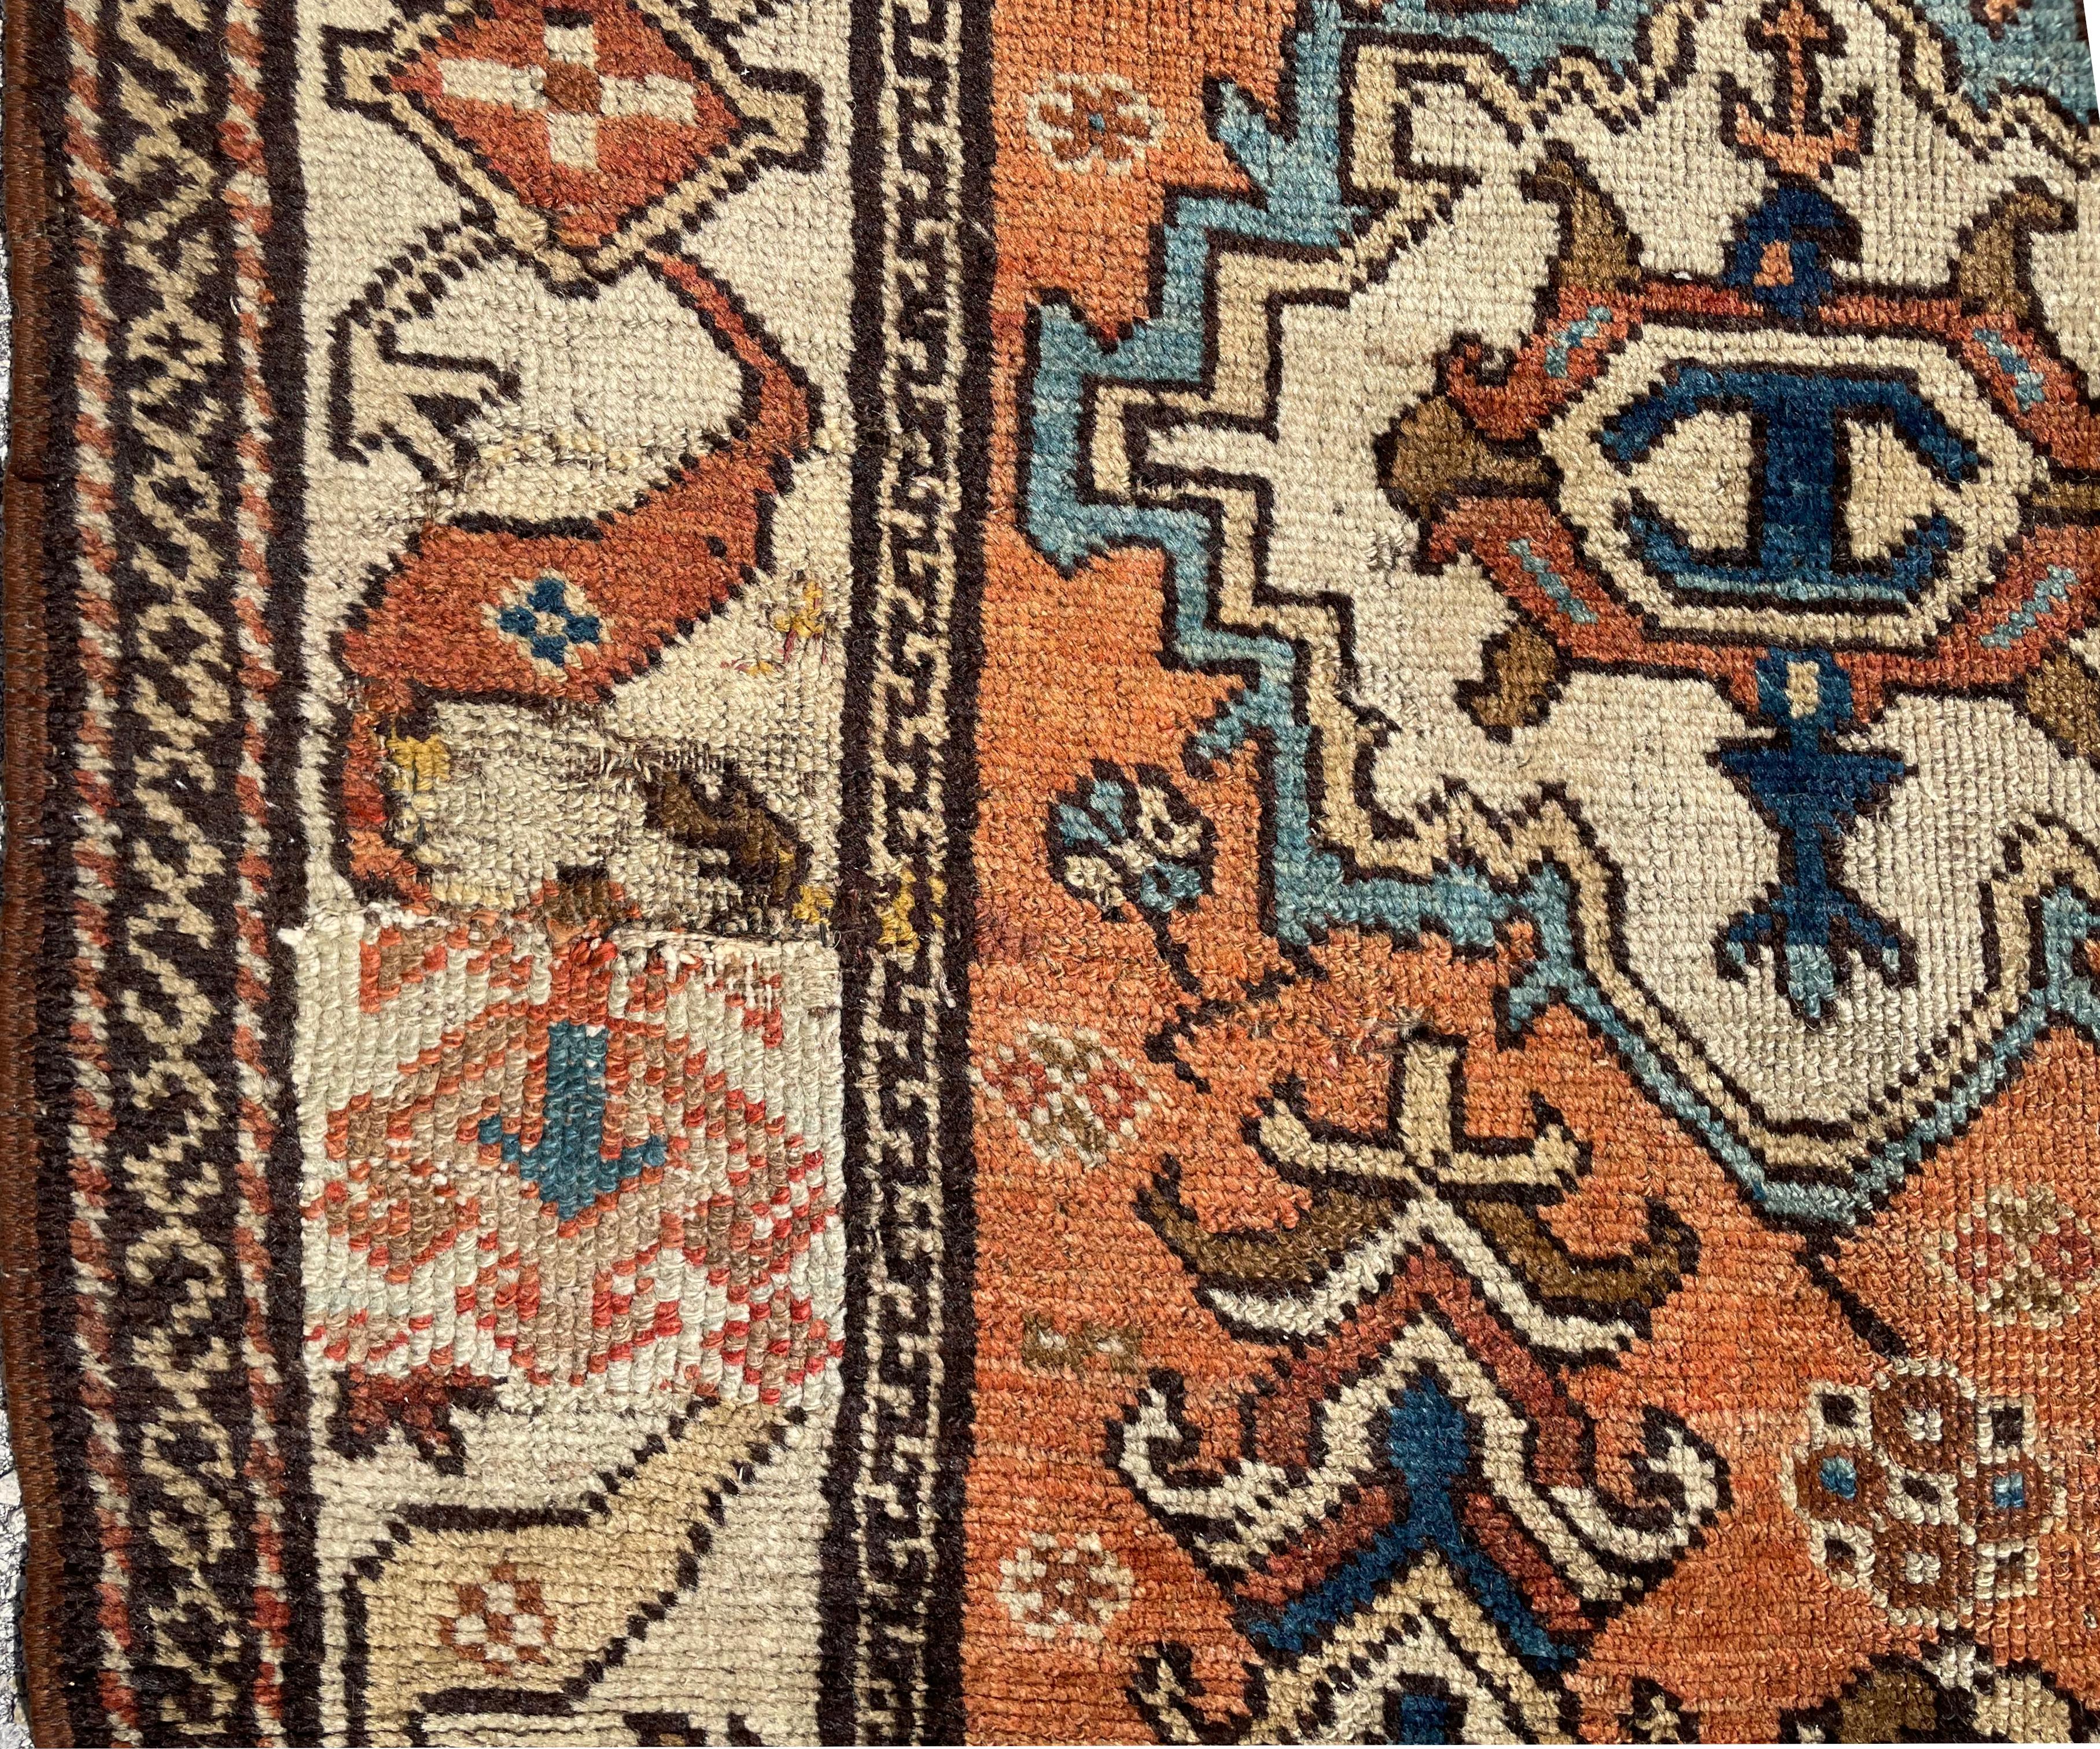 
Antique Kurdish Brergama, West Anatolia
Circa 1900. 
The center rust field with various large stylized flower heads, with scattered smaller blossoms and leafy bushes, the center cream border with a repeating pattern of connected diamonds and